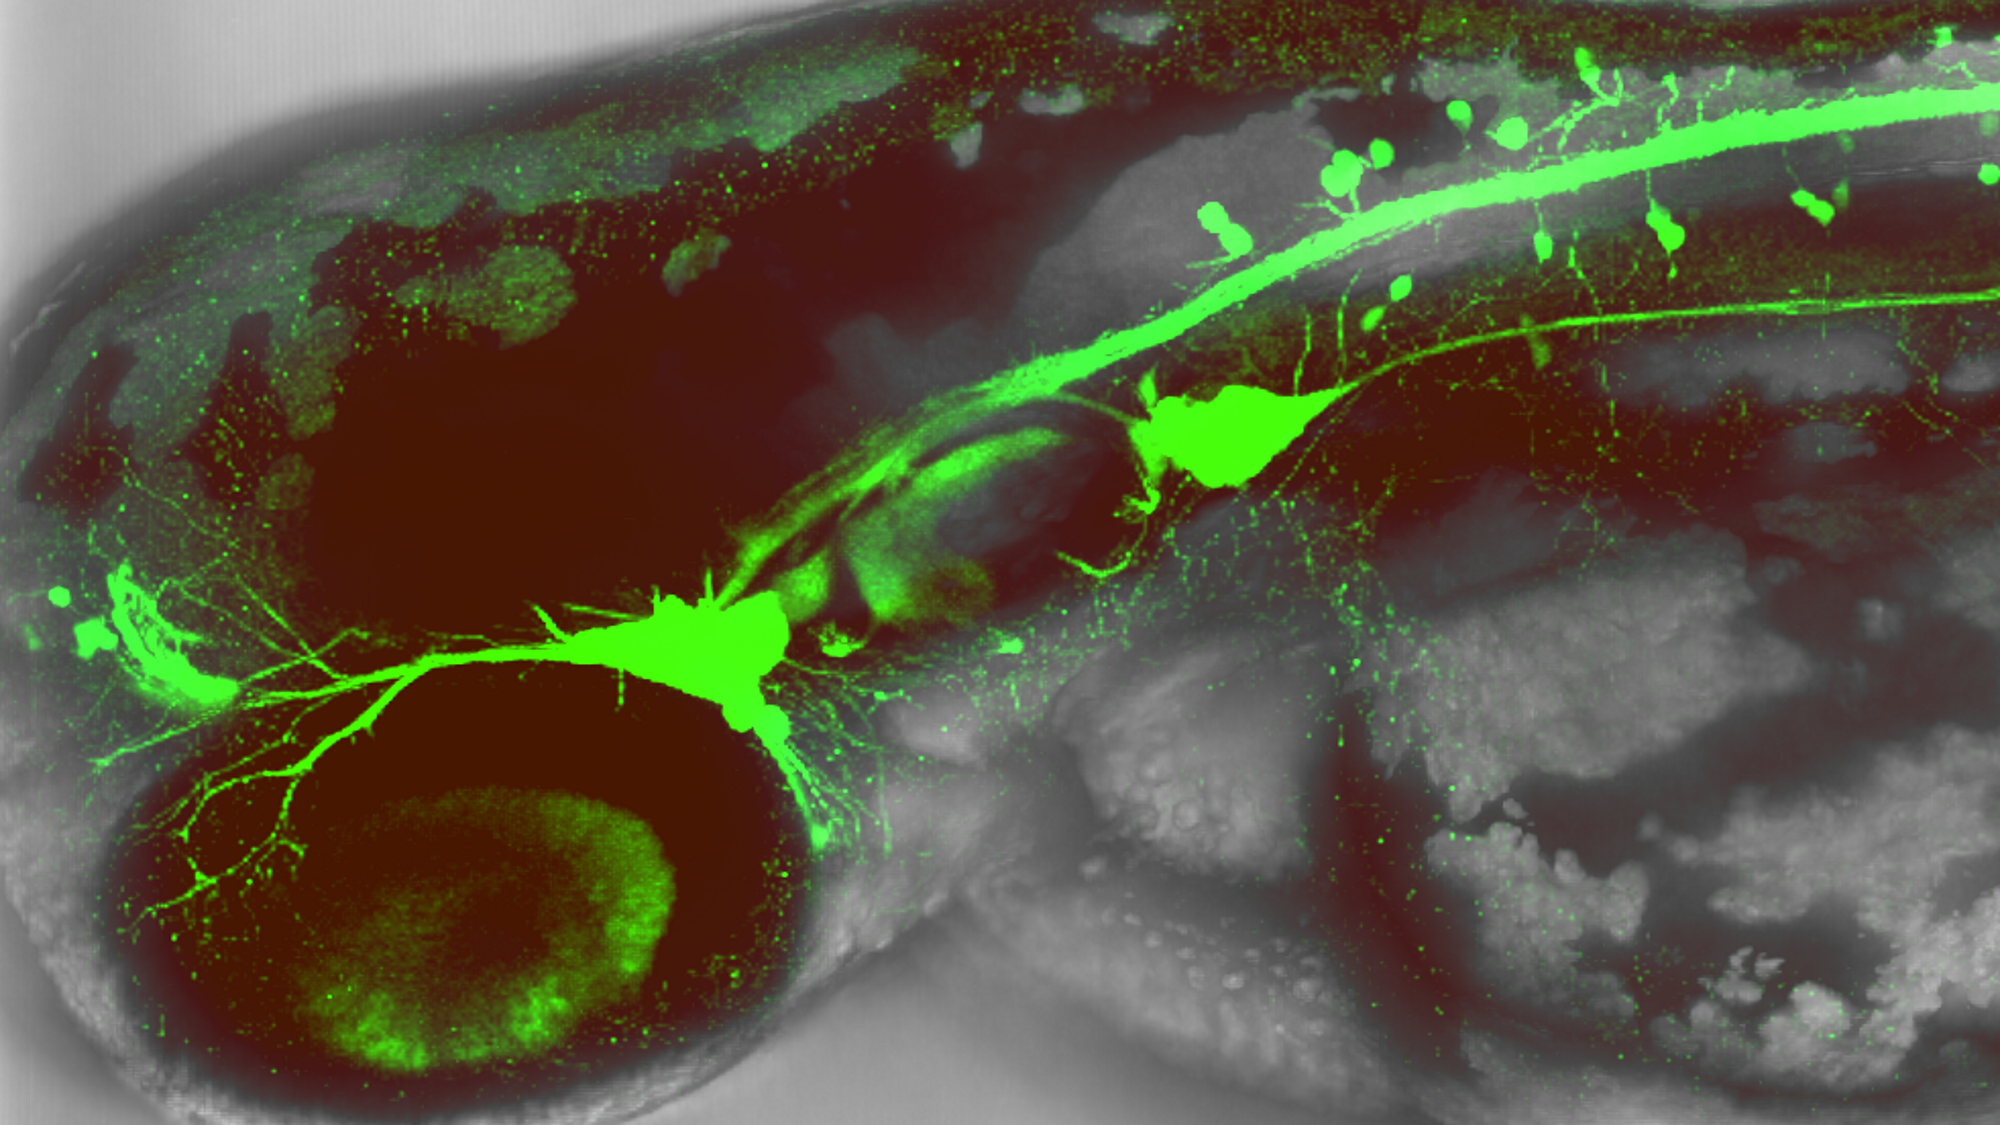 48h old zebrafish embryo displaying fluorescent sensory in neurons.